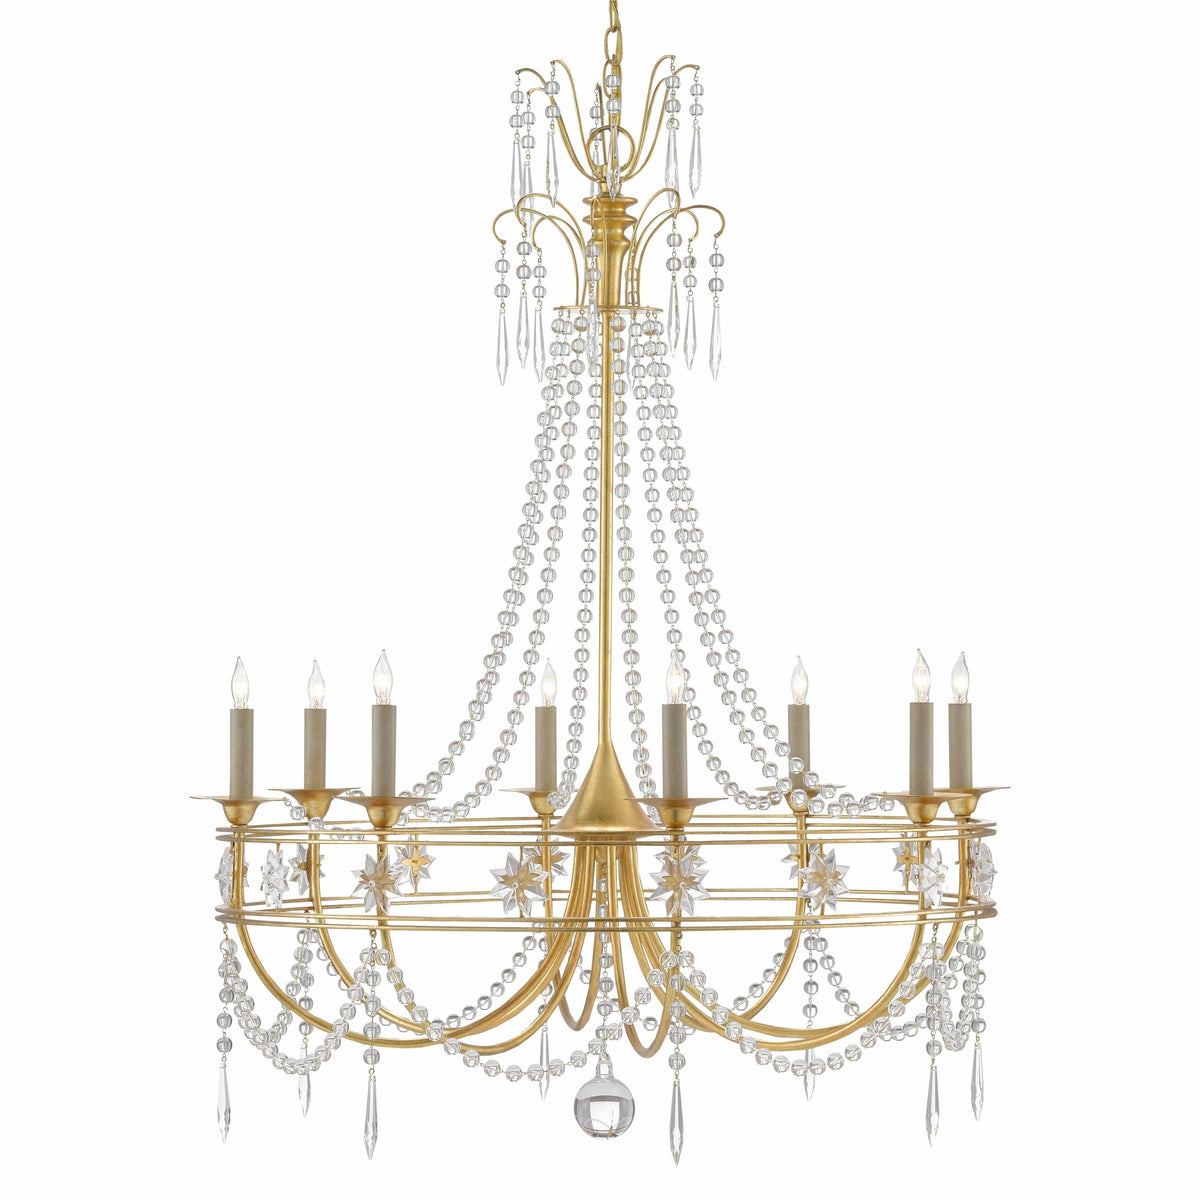 Currey and Company - Dream-Maker Chandelier - 9000-0740 | Montreal Lighting & Hardware